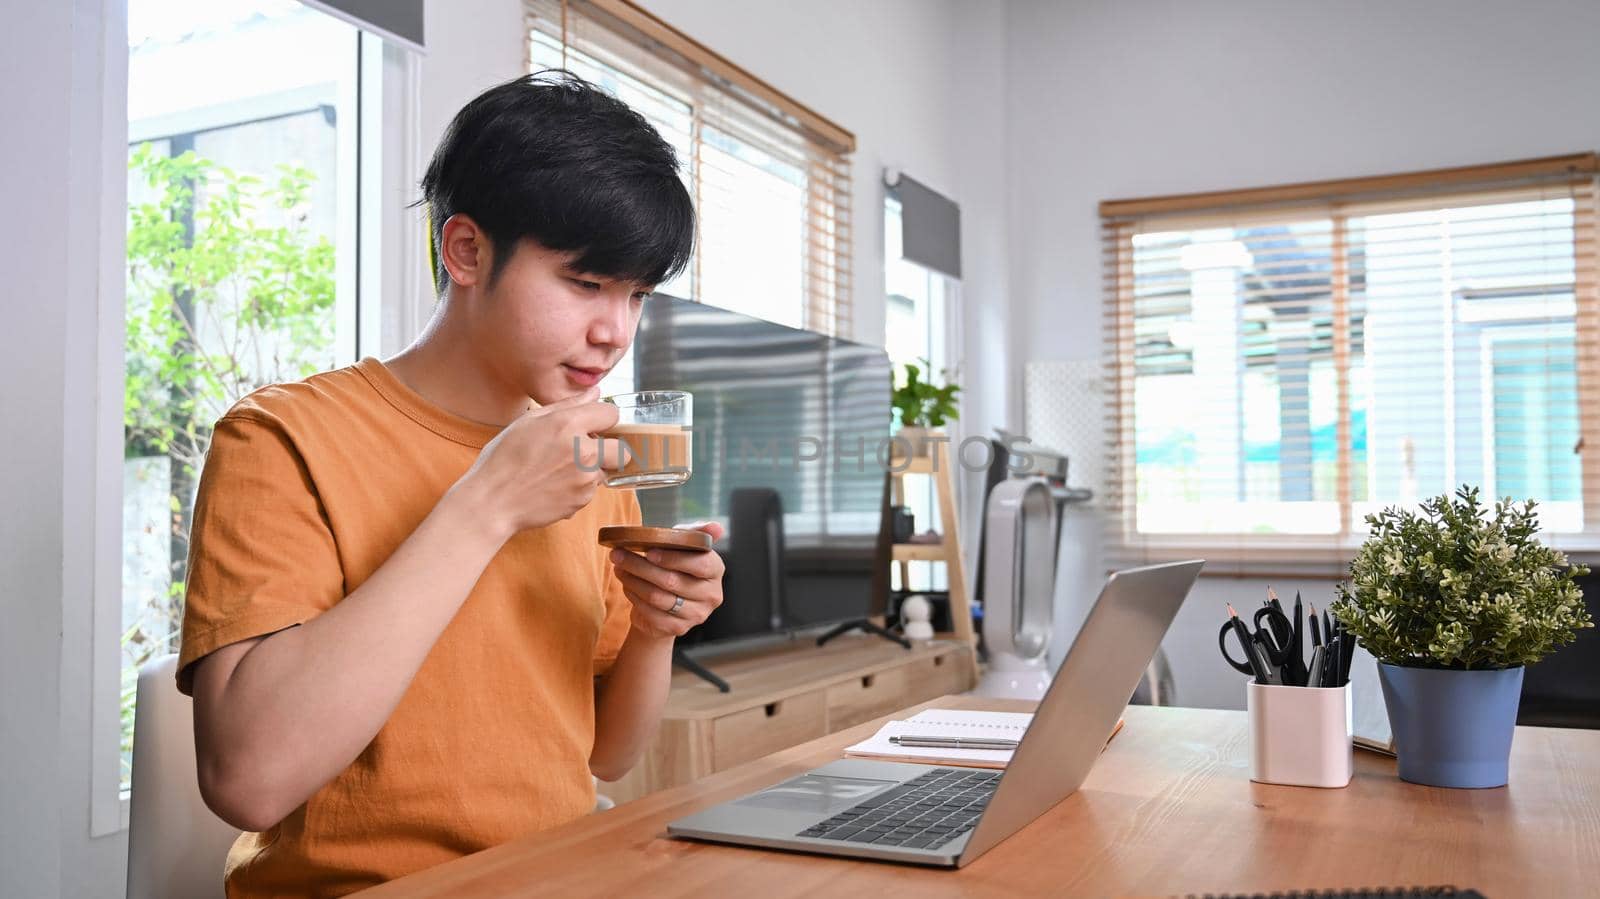 Casual man drinking coffee and using laptop computer at home. by prathanchorruangsak